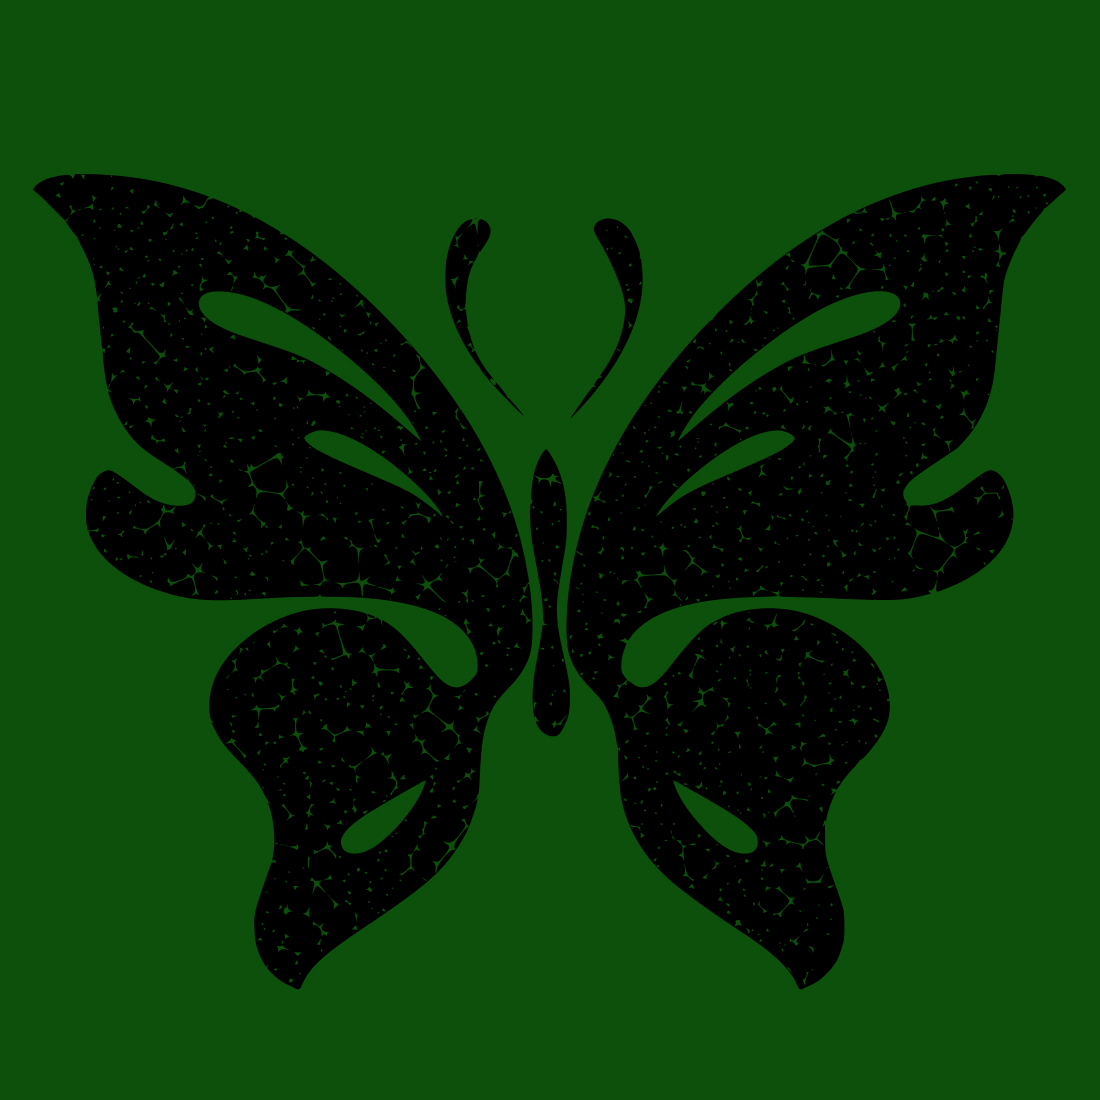 Metallic Insect Geometric Butterfly SVG preview.